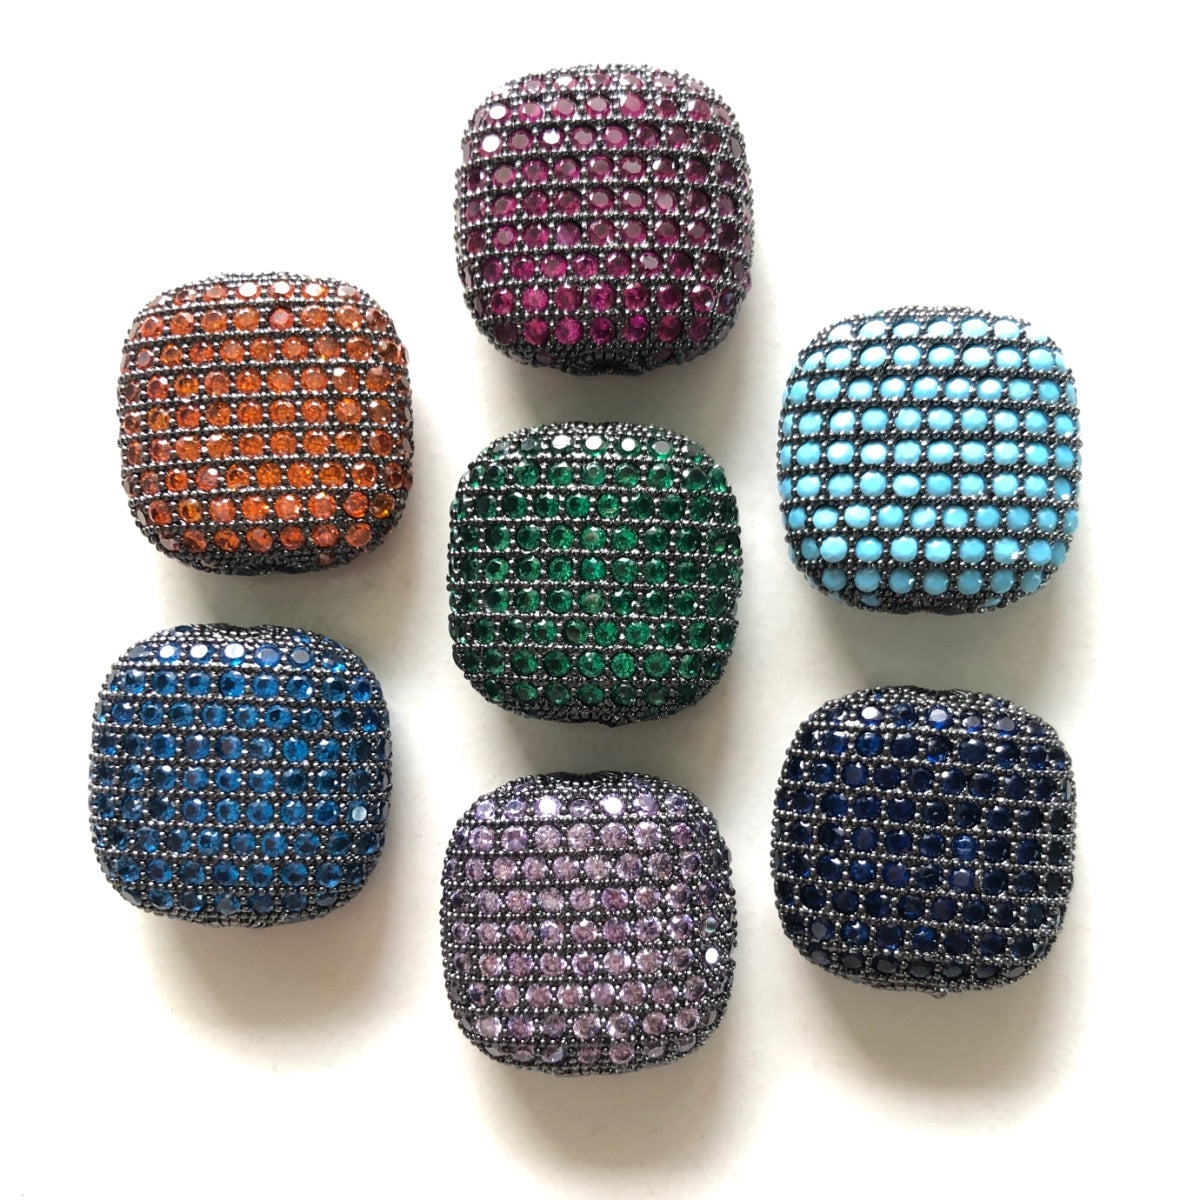 5-10pcs/lot 20*20mm Colorful CZ Paved Square Centerpiece Spacers Mix Random Colors CZ Paved Spacers Colorful Zirconia Square Spacers Charms Beads Beyond